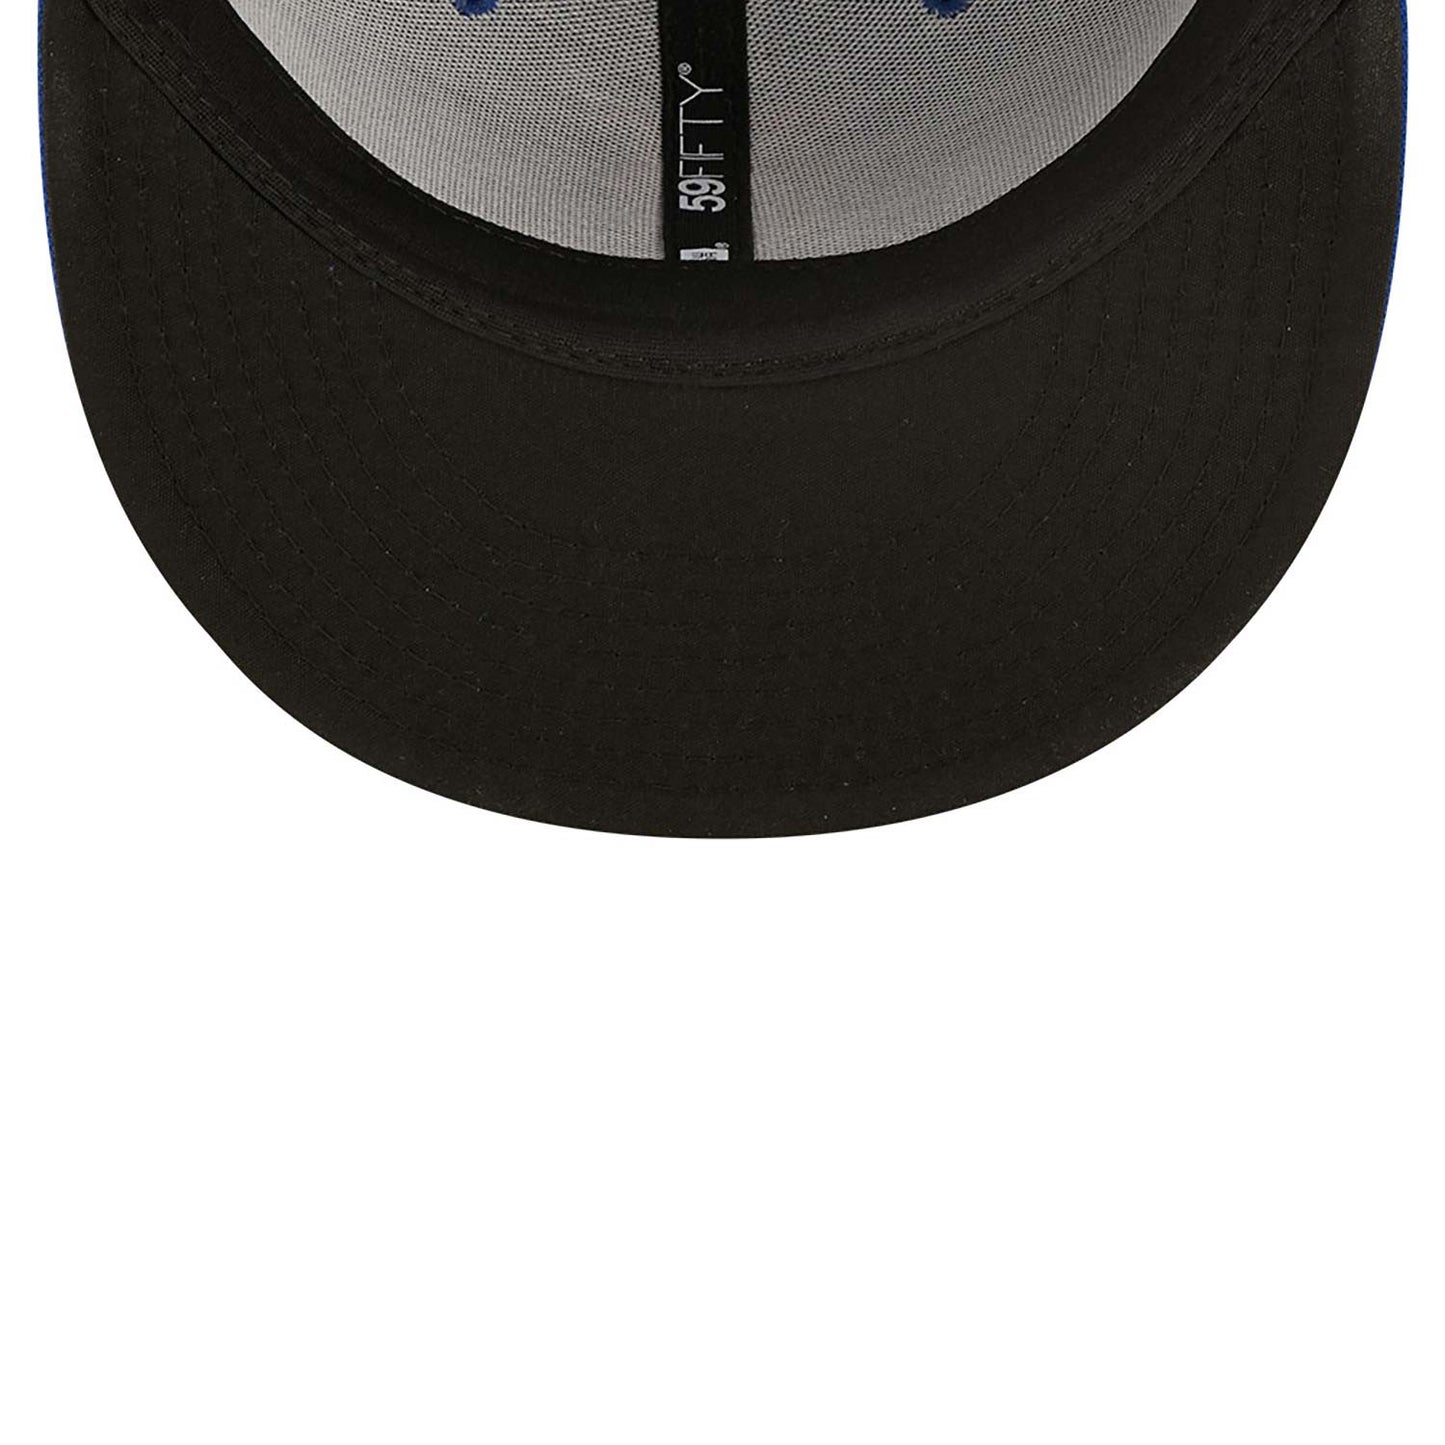 NEW ERA New York Mets Authentic On Field Game Blue 59FIFTY Fitted Cap